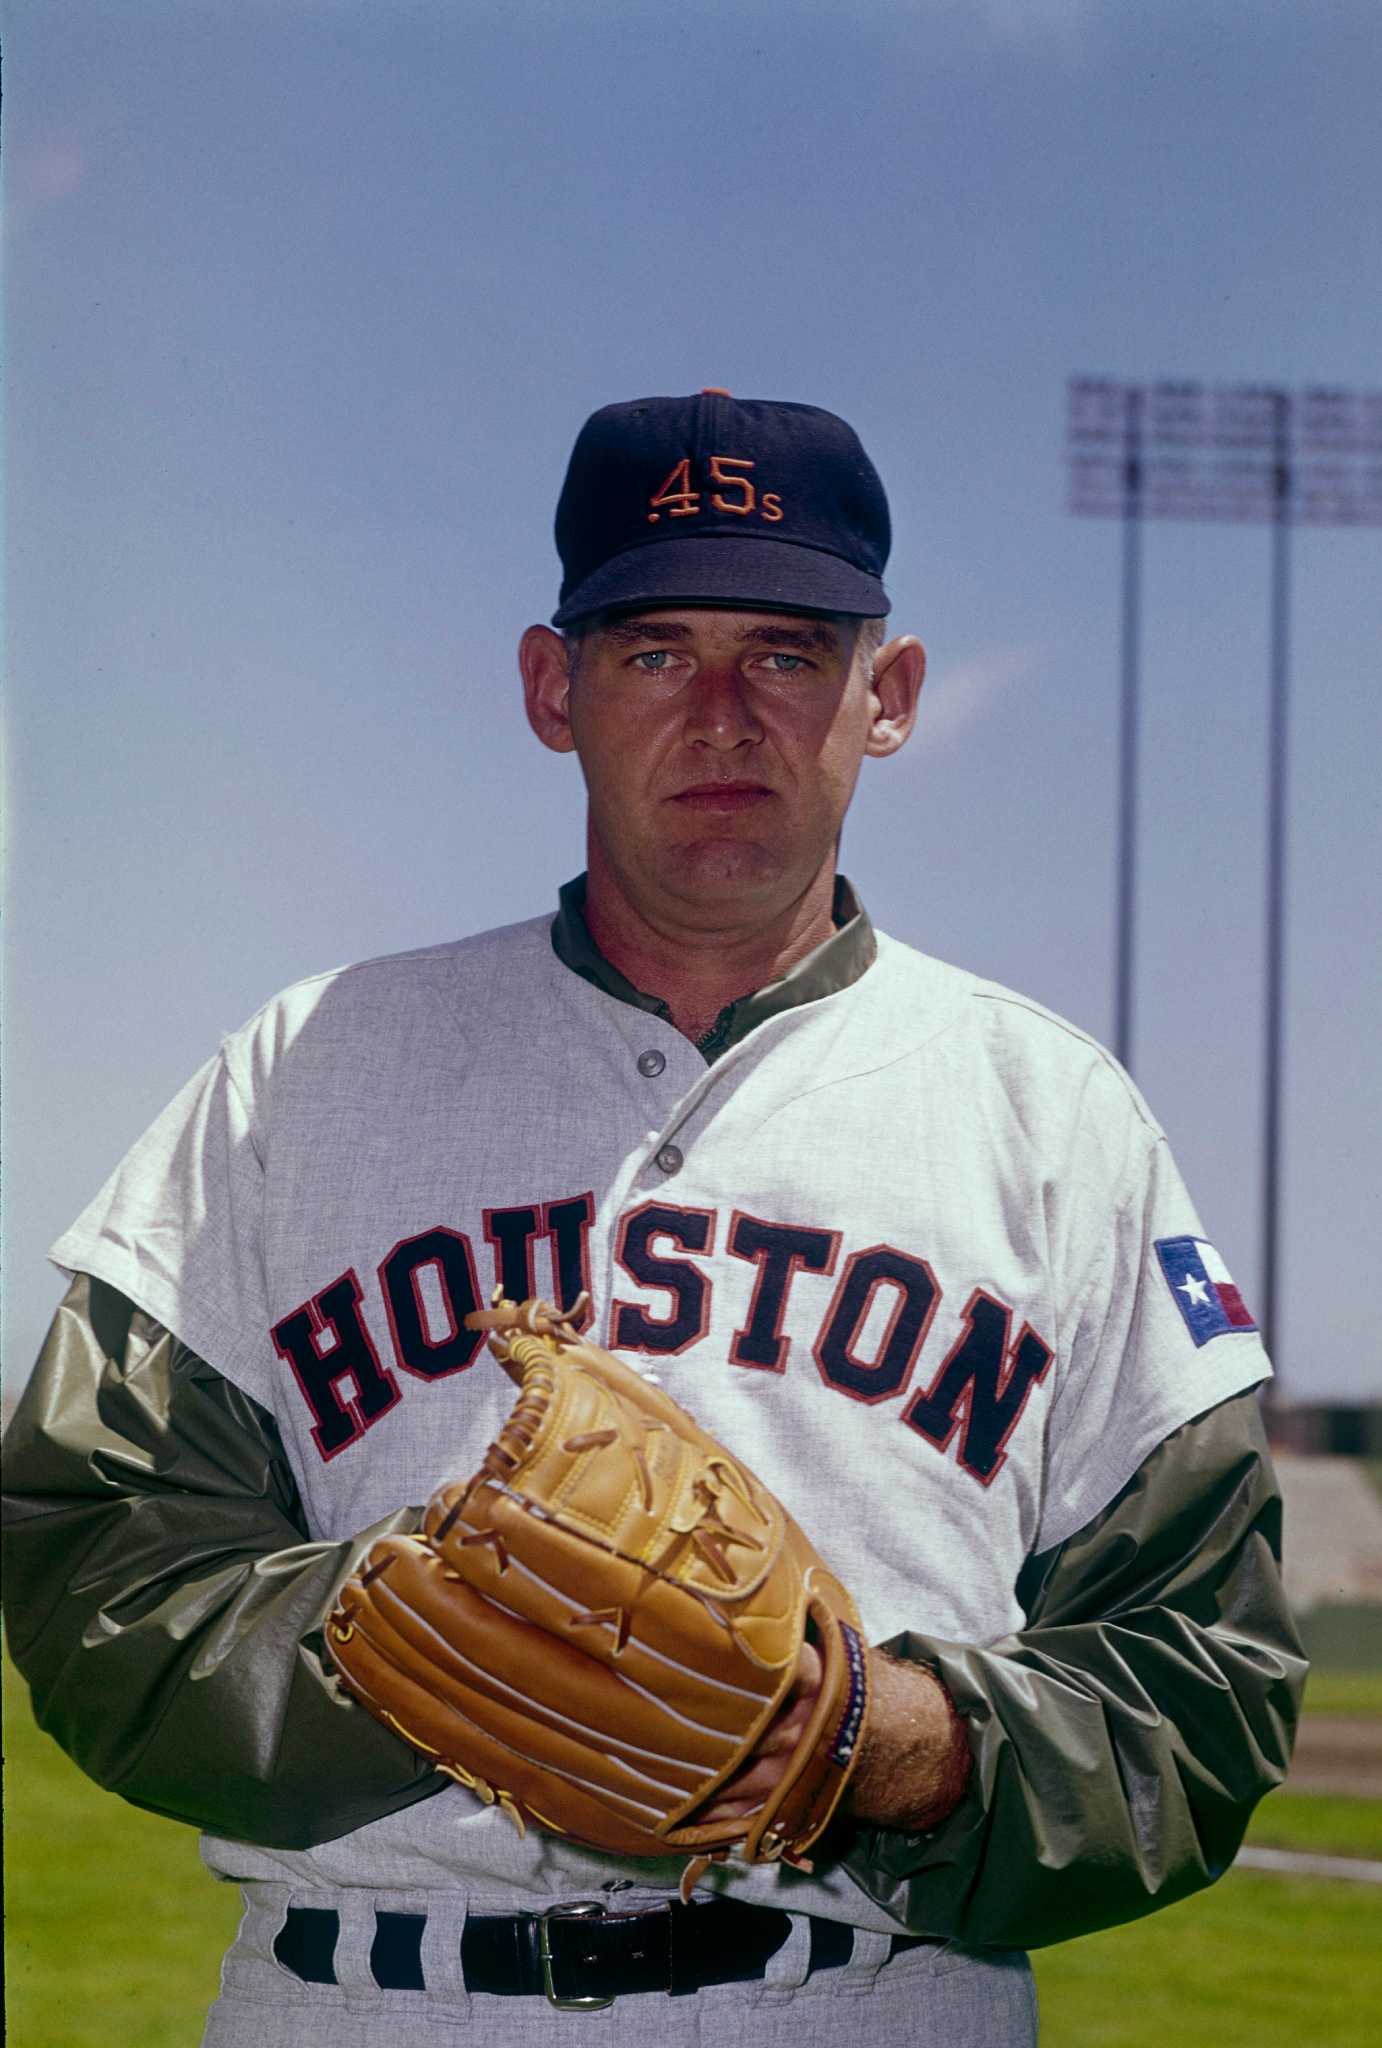 When the Colt .45s became the Astros and the origins of other Houston  sports team names